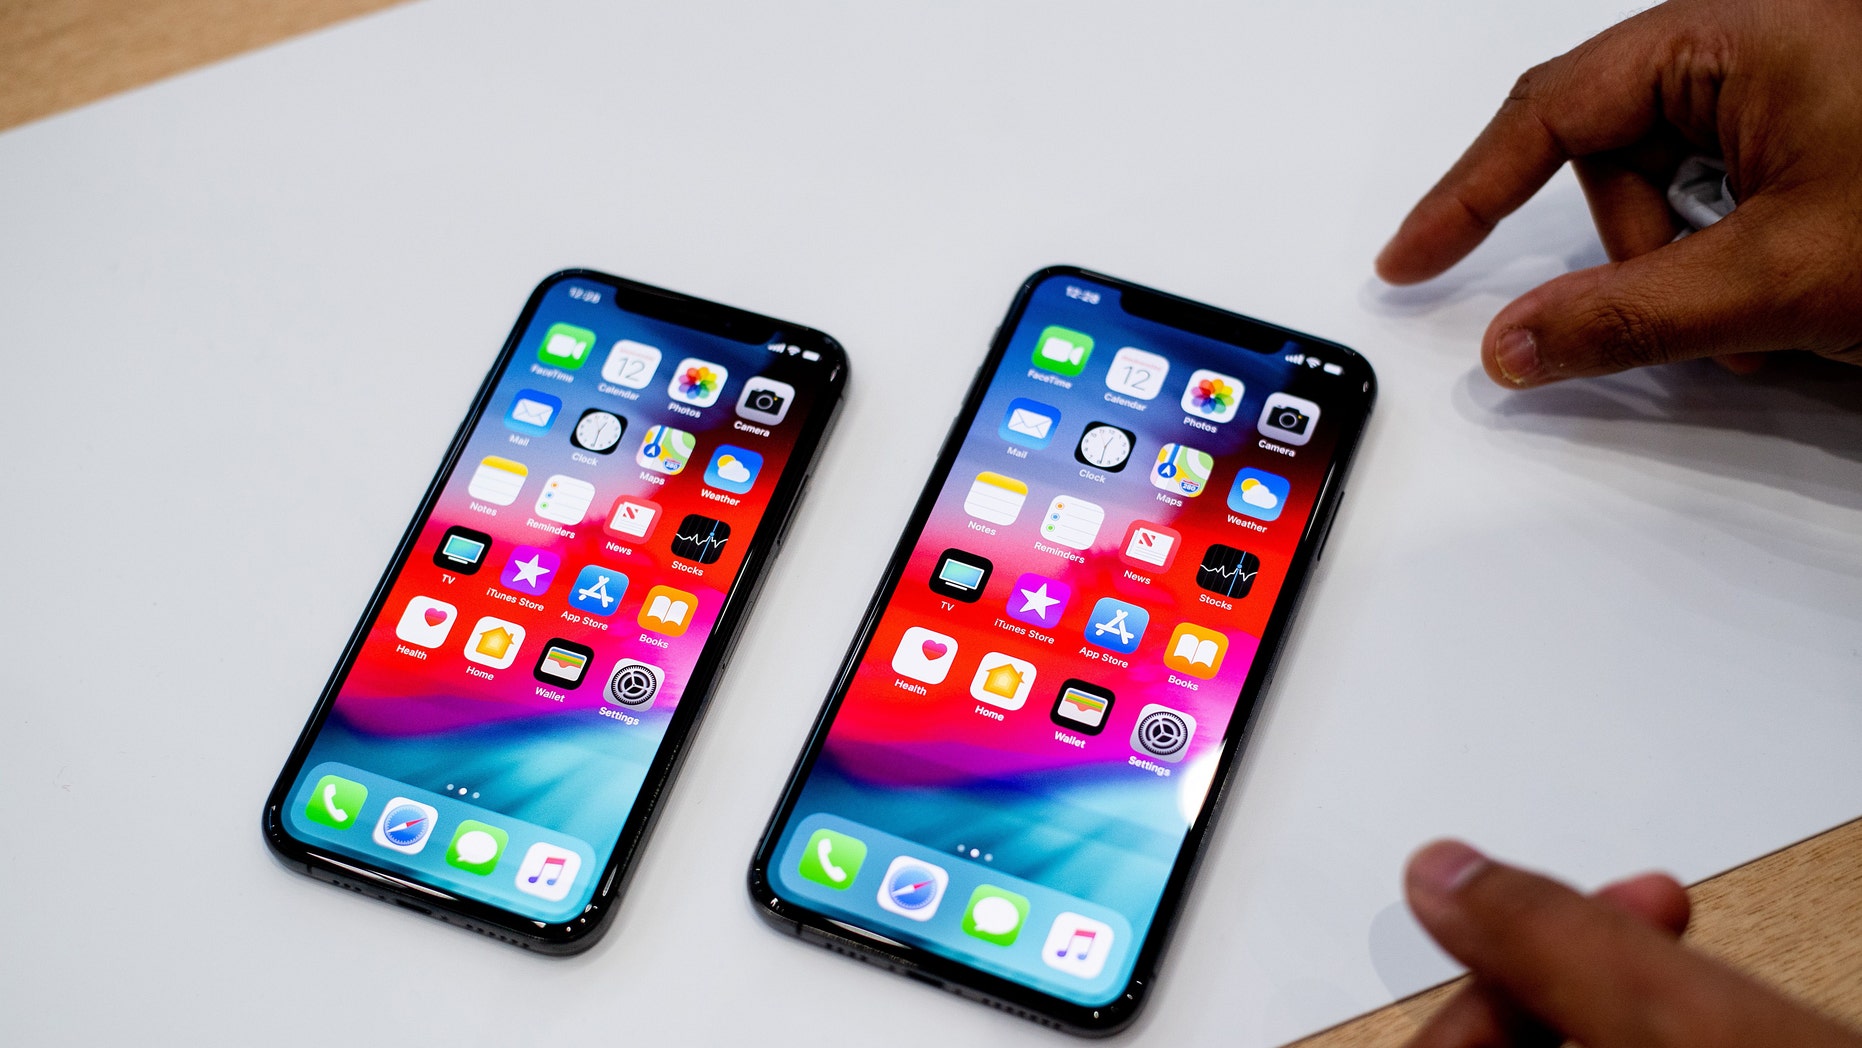 An Apple iPhone Xs Max (R) and iPhone Xs rest on a table during a launch event on September 12, 2018, in Cupertino, California.